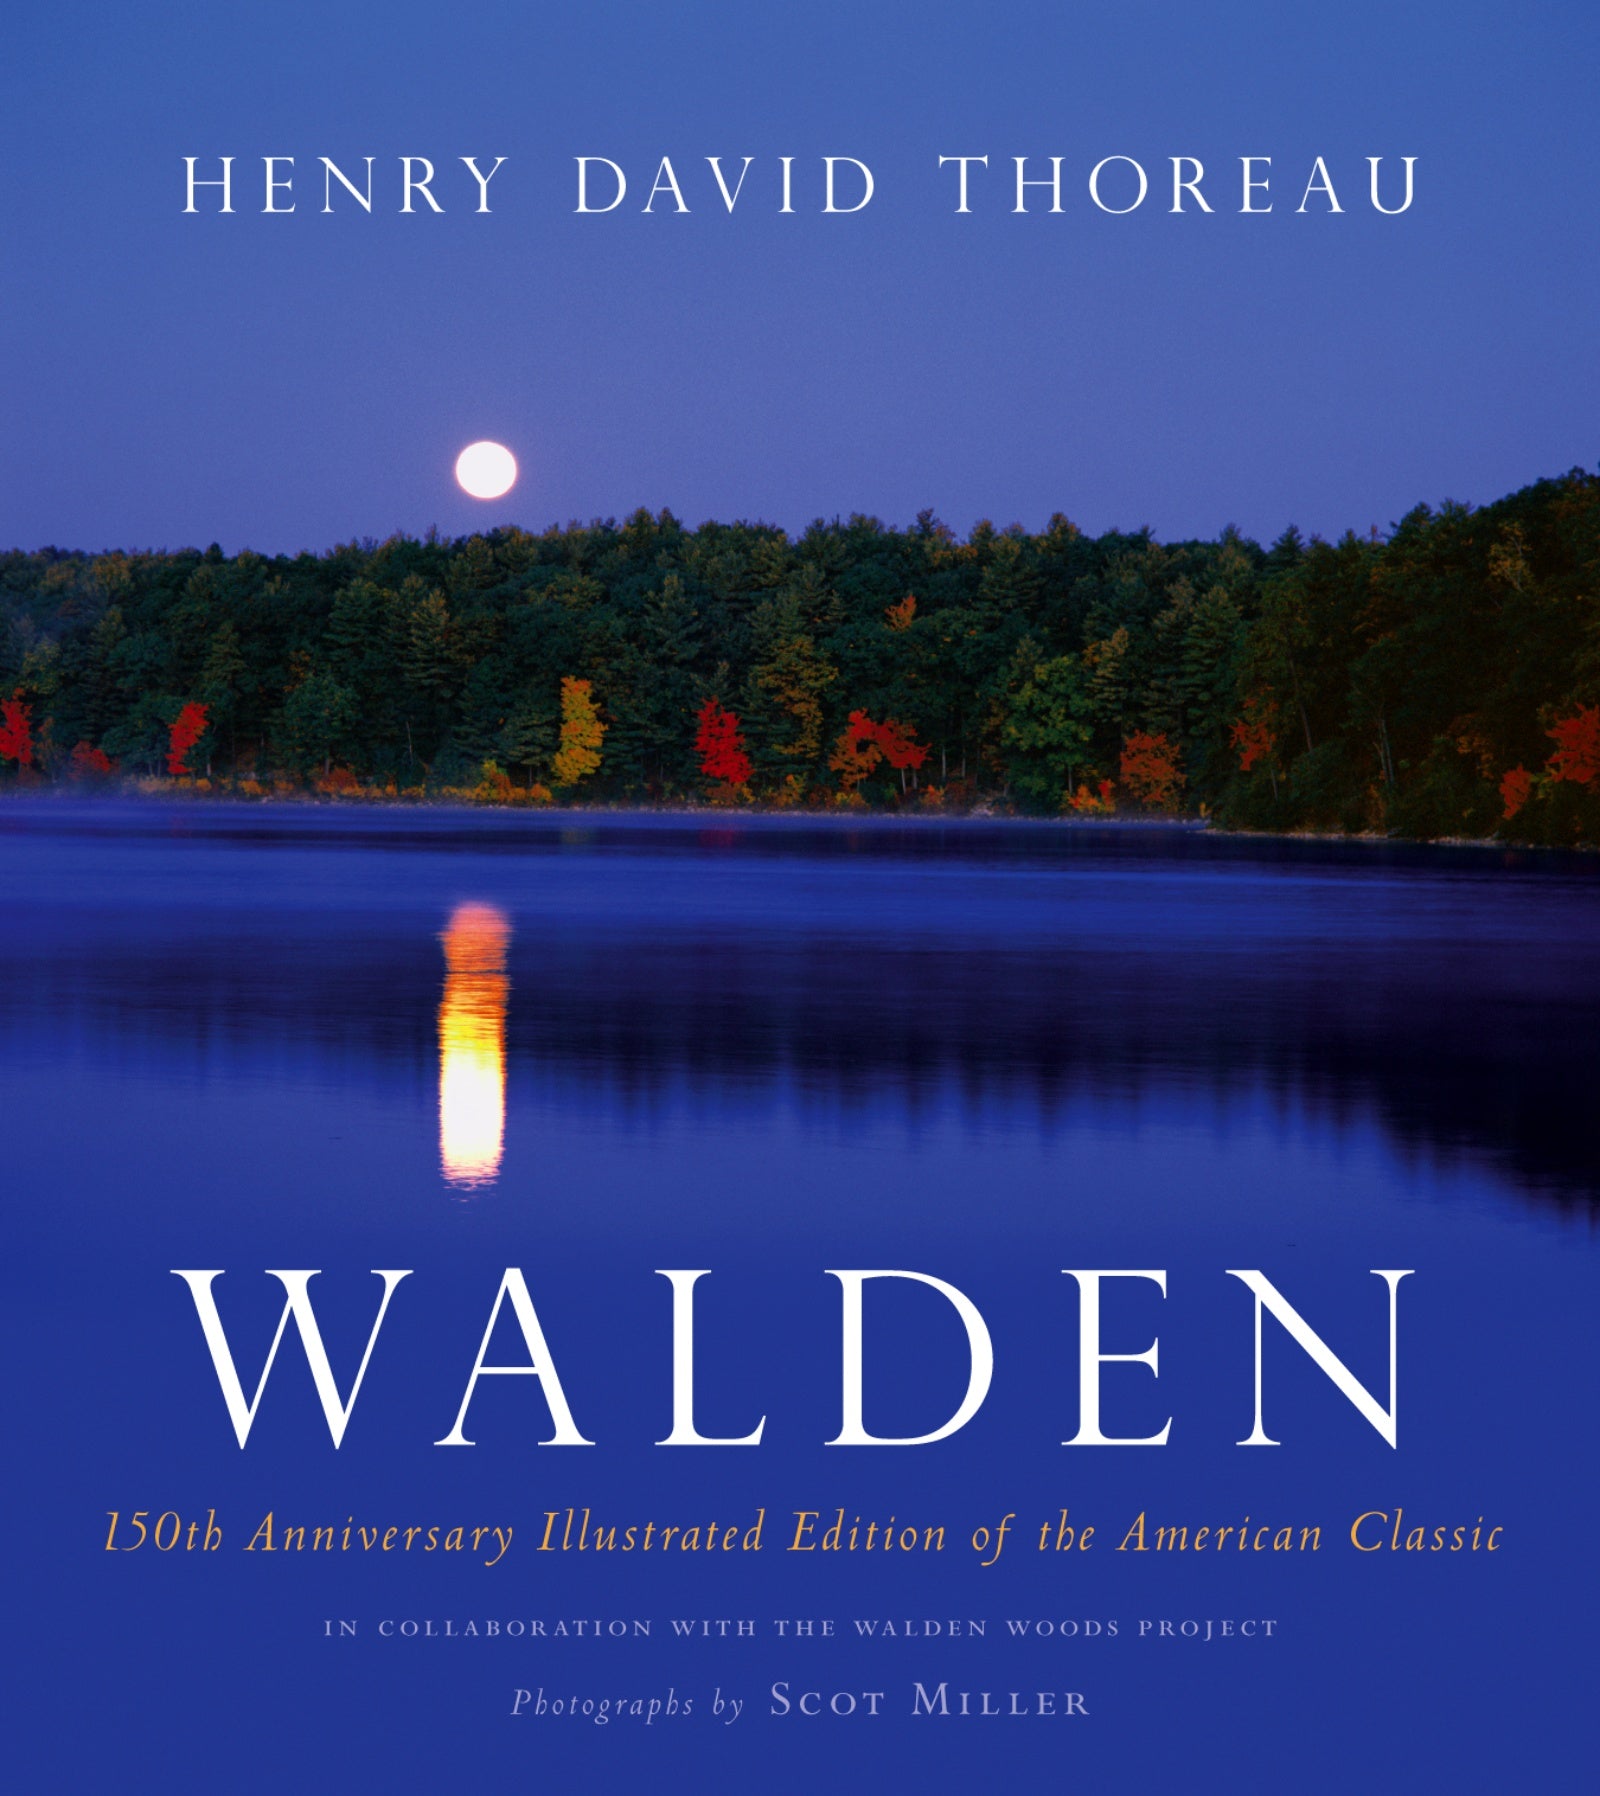 Walden : 150th Anniversary Illustrated Edition of the American Classic